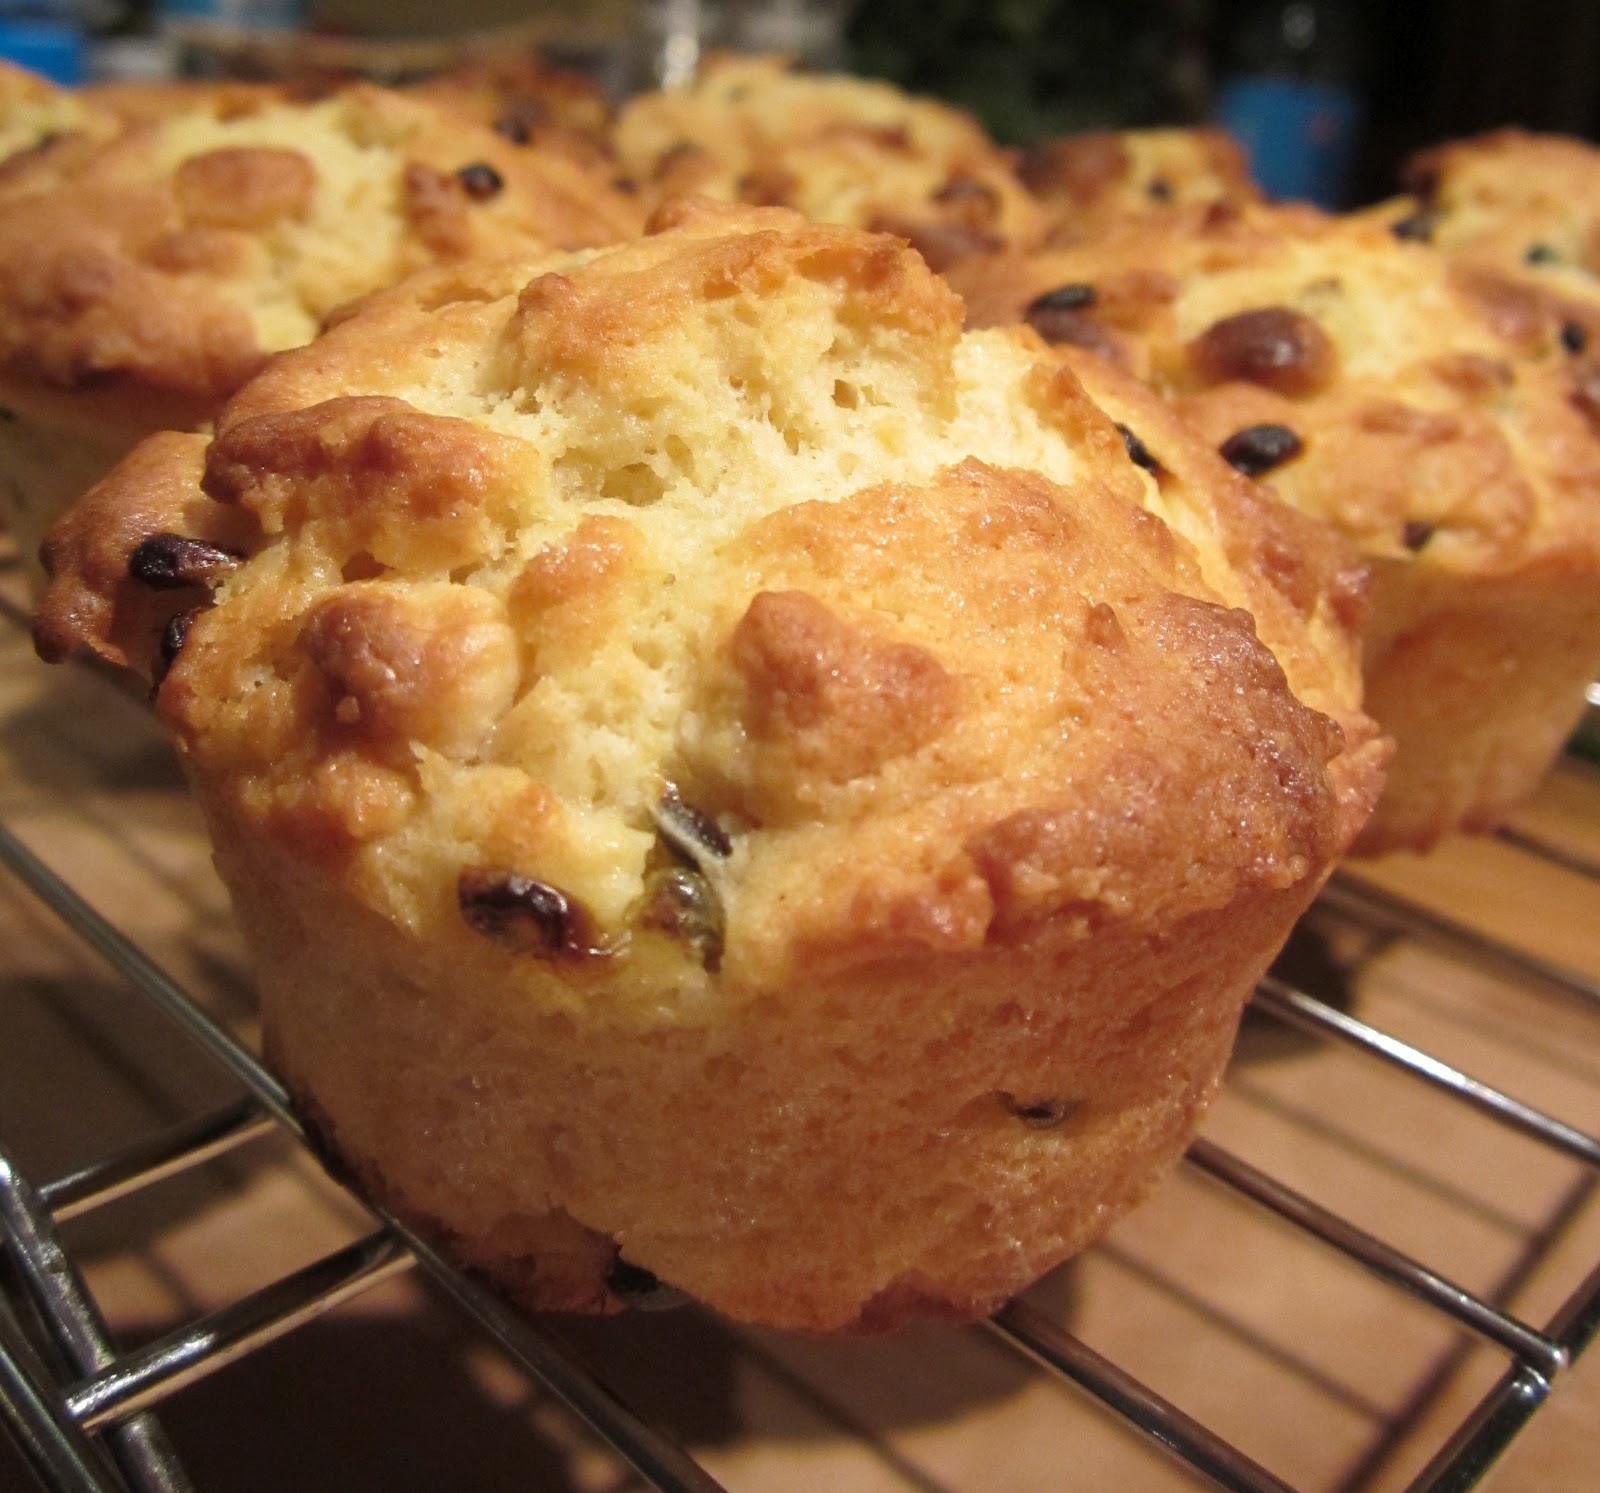 Edible Escapades: Passionfruit White Chocolate Muffins